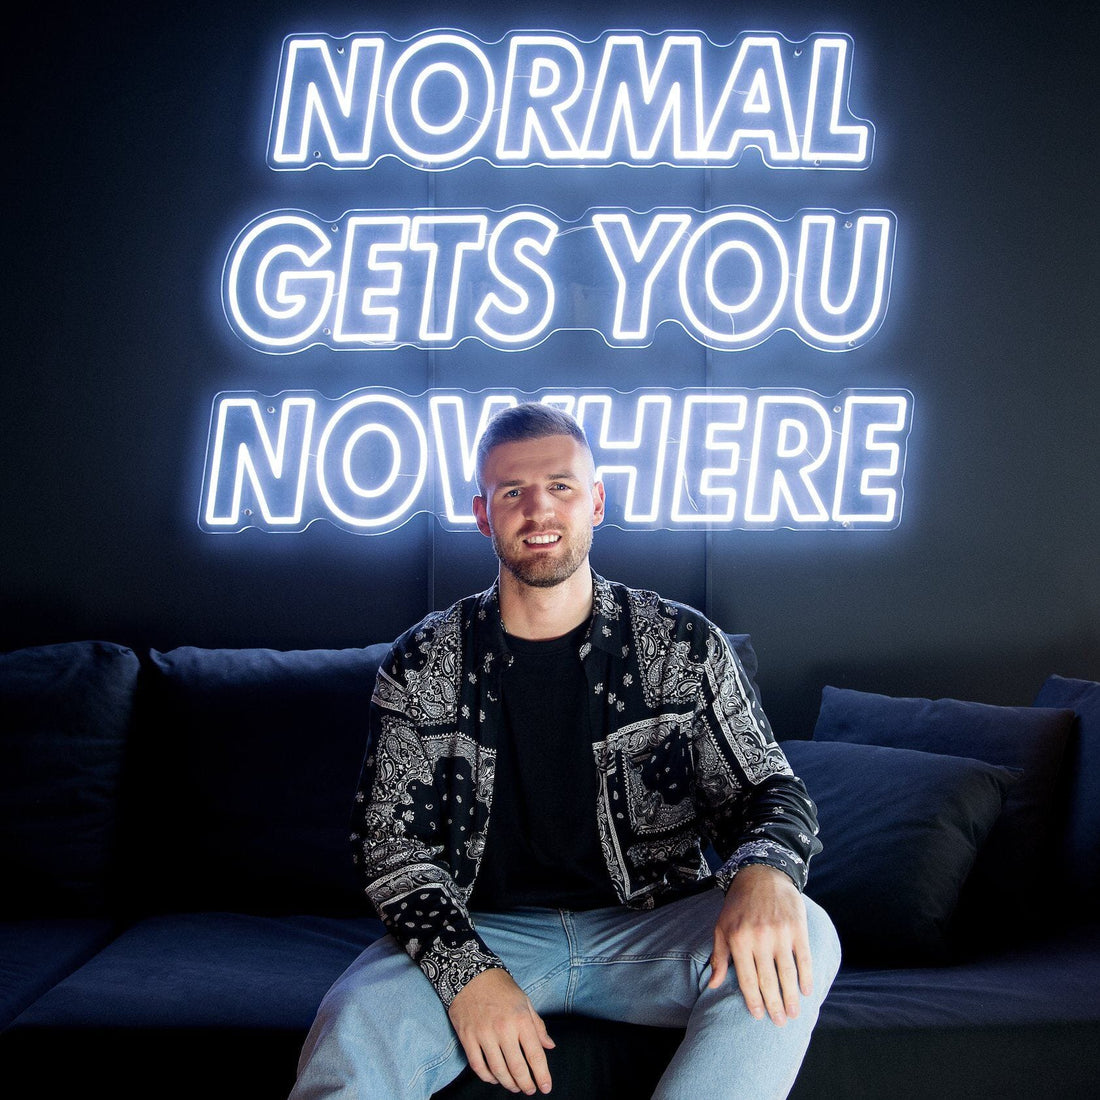 "Normal Gets You Nowhere": Born Originals Launches Own Podcast